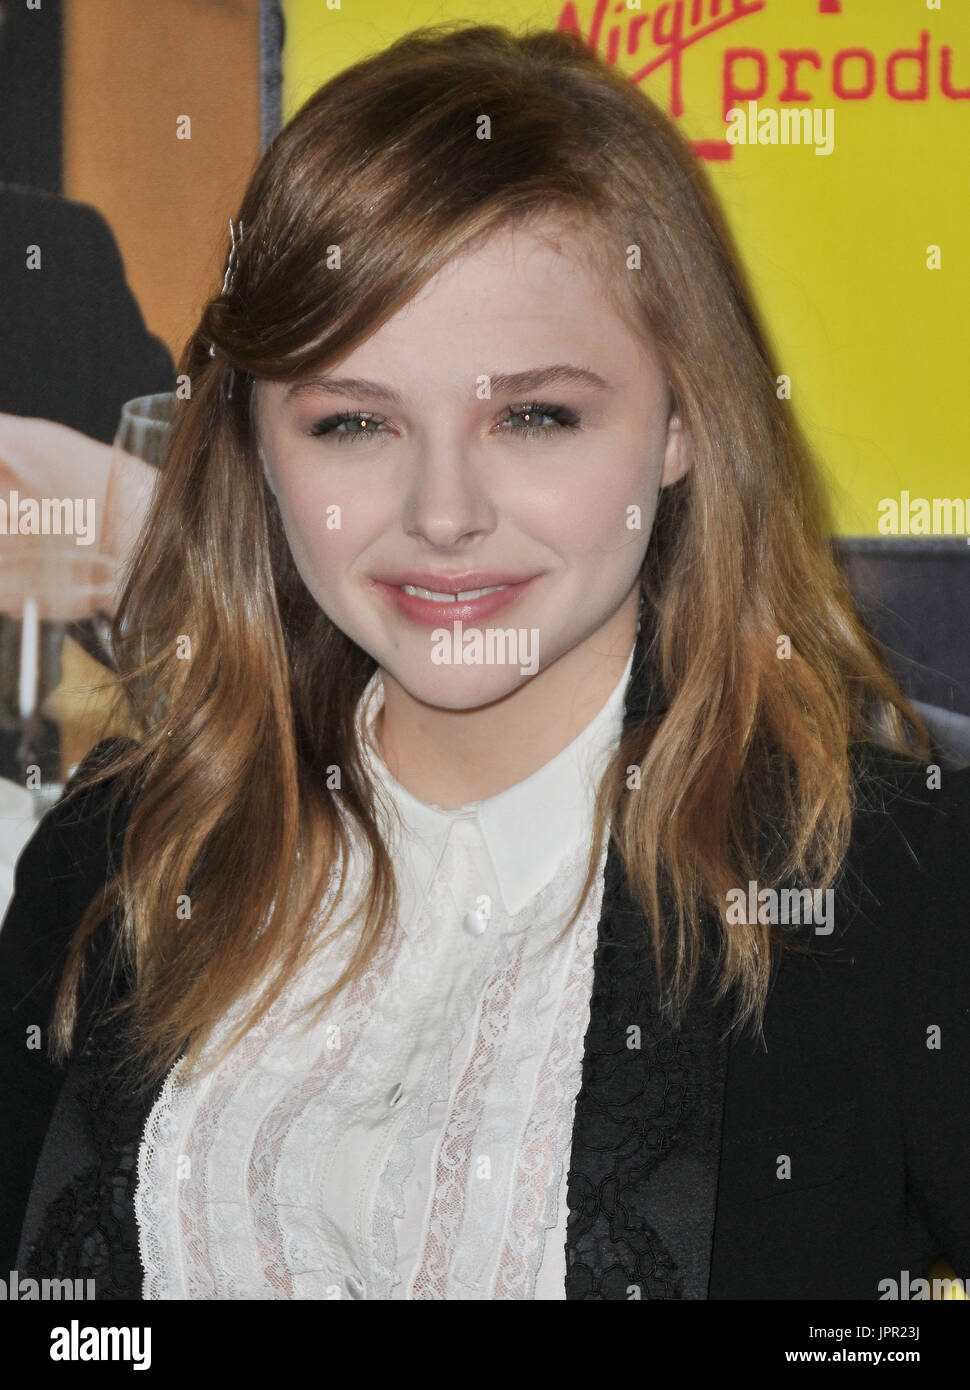 Chloe Grace Moretz attends the 'Movie 43' premiere held at the Chinese  Theatre in Los Angeles, CA, USA on January 23, 2013. Photo by Lionel  Hahn/ABACAPRESS.COM Stock Photo - Alamy